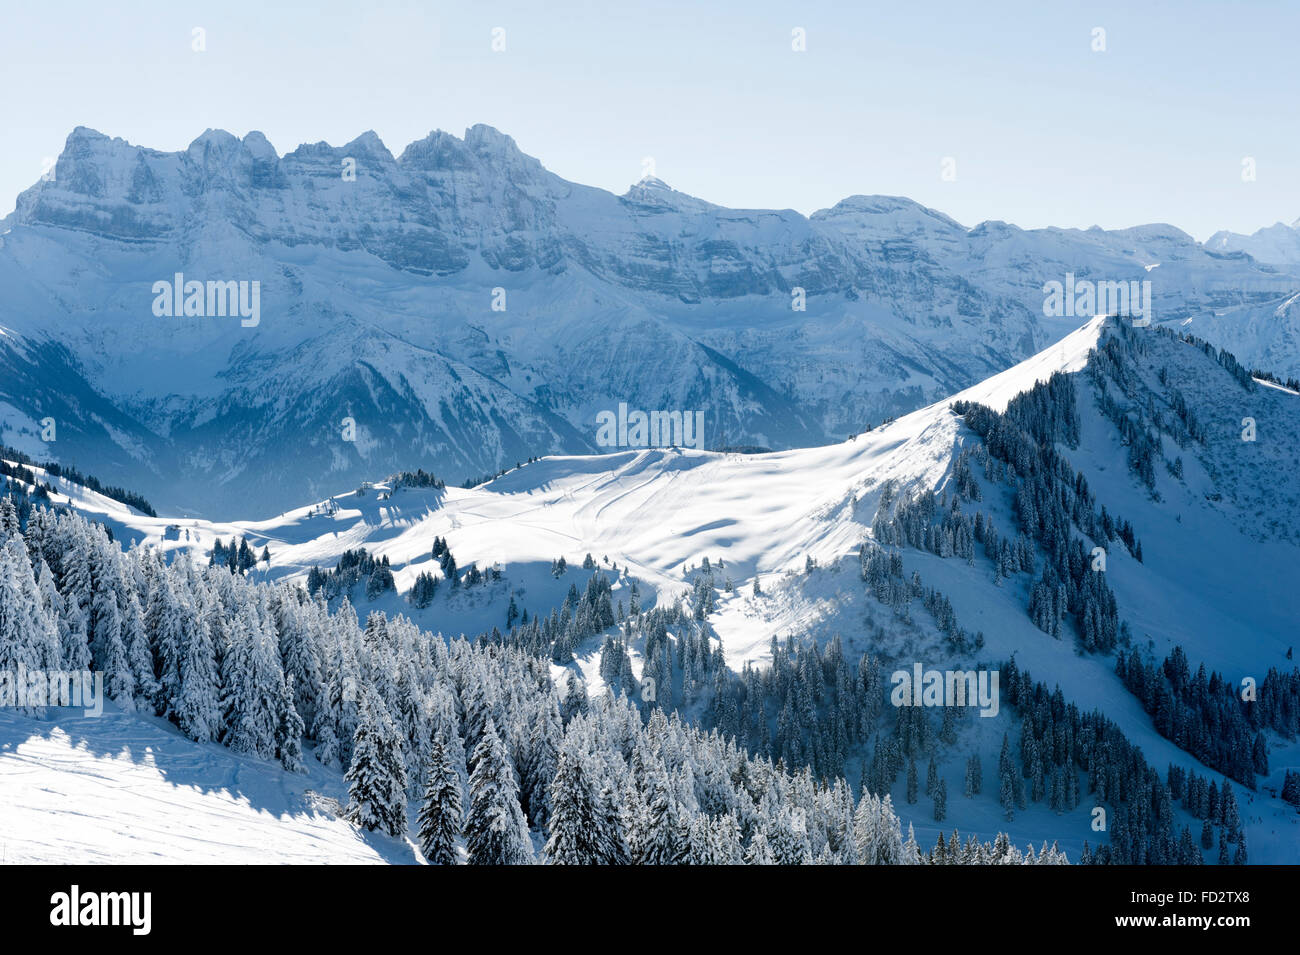 The mountain range of Dents du Midi in the French Alps near Châtel, Portes du Soleil, in winter Stock Photo